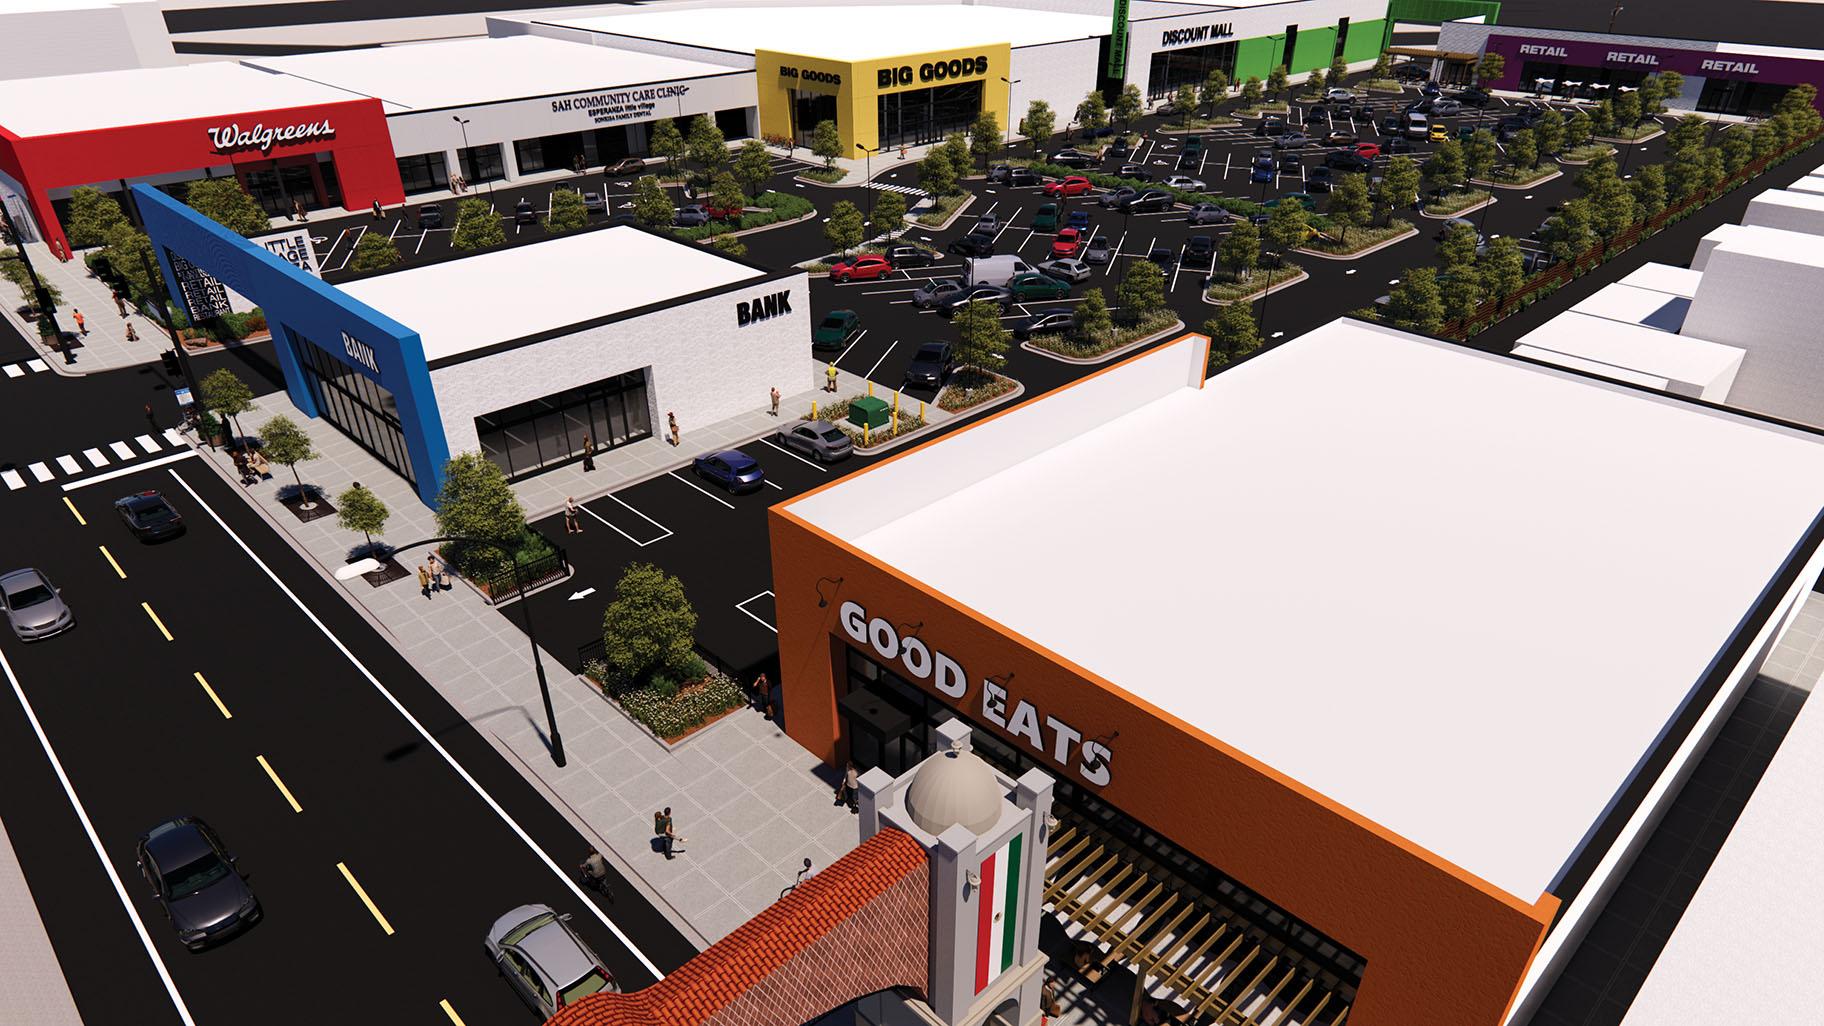 A rendering of the redesigned area around the Discount Mall in Little Village (Courtesy of Novak Construction, Mid-America and Hirsch, MPG)